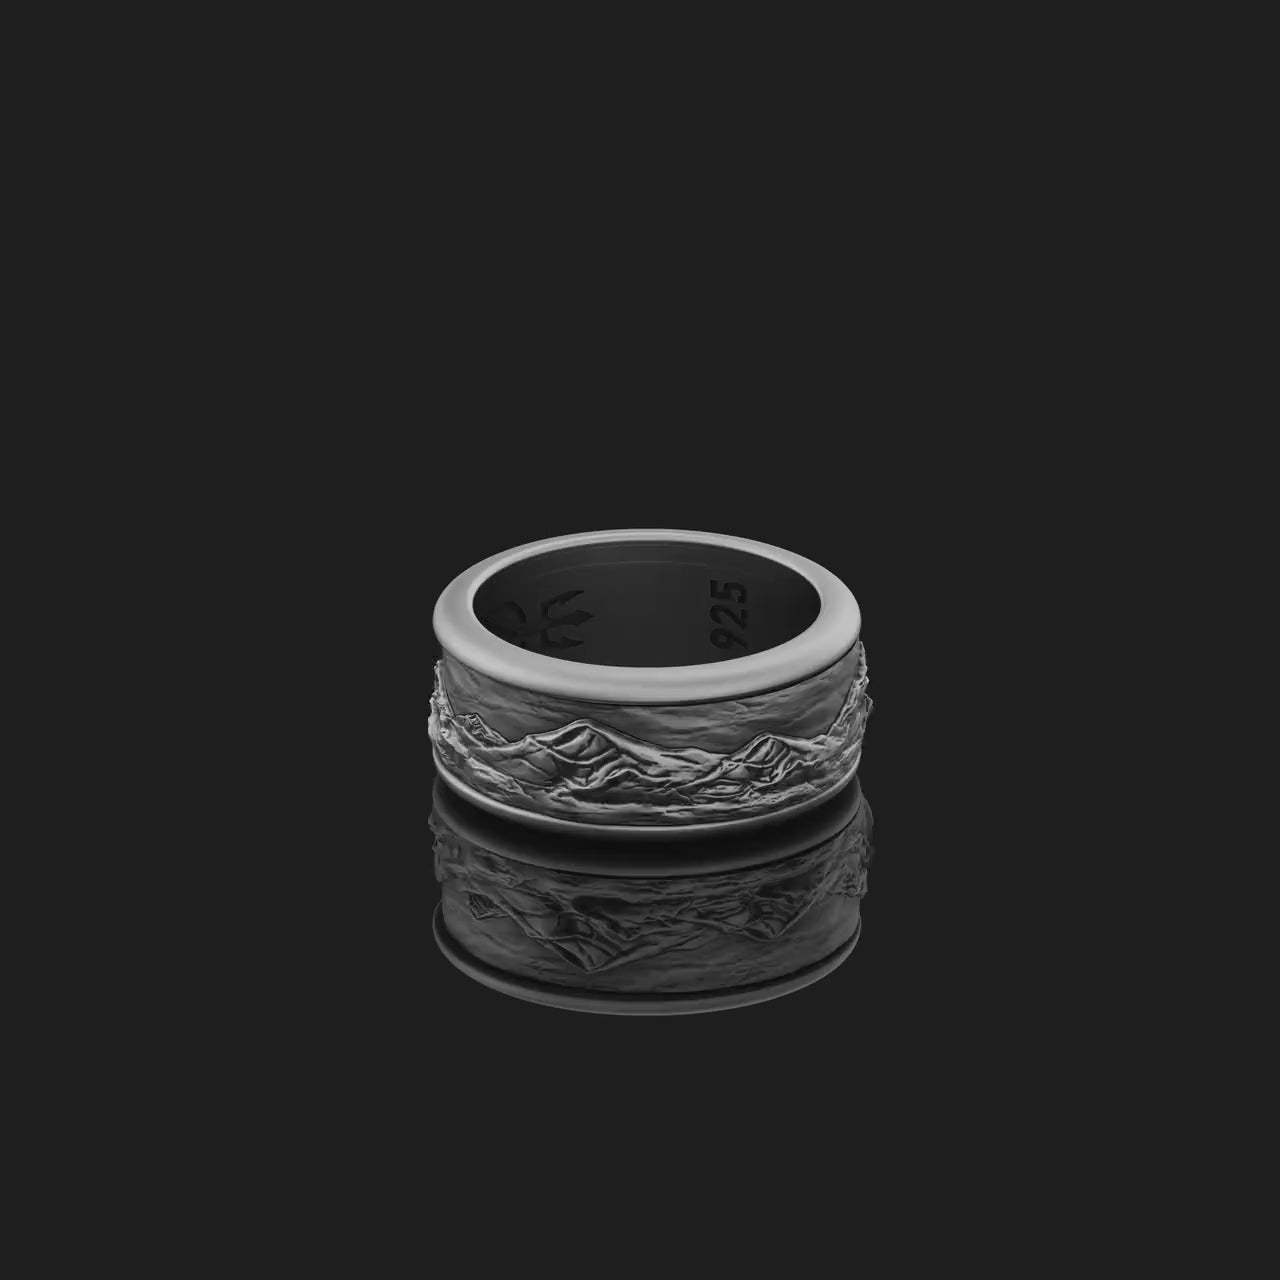 Rotating Mountain Engraved Ring, Nature and Adventure Inspired, Hiking Lover's Gift, Summit & Landscape Scene Jewelry